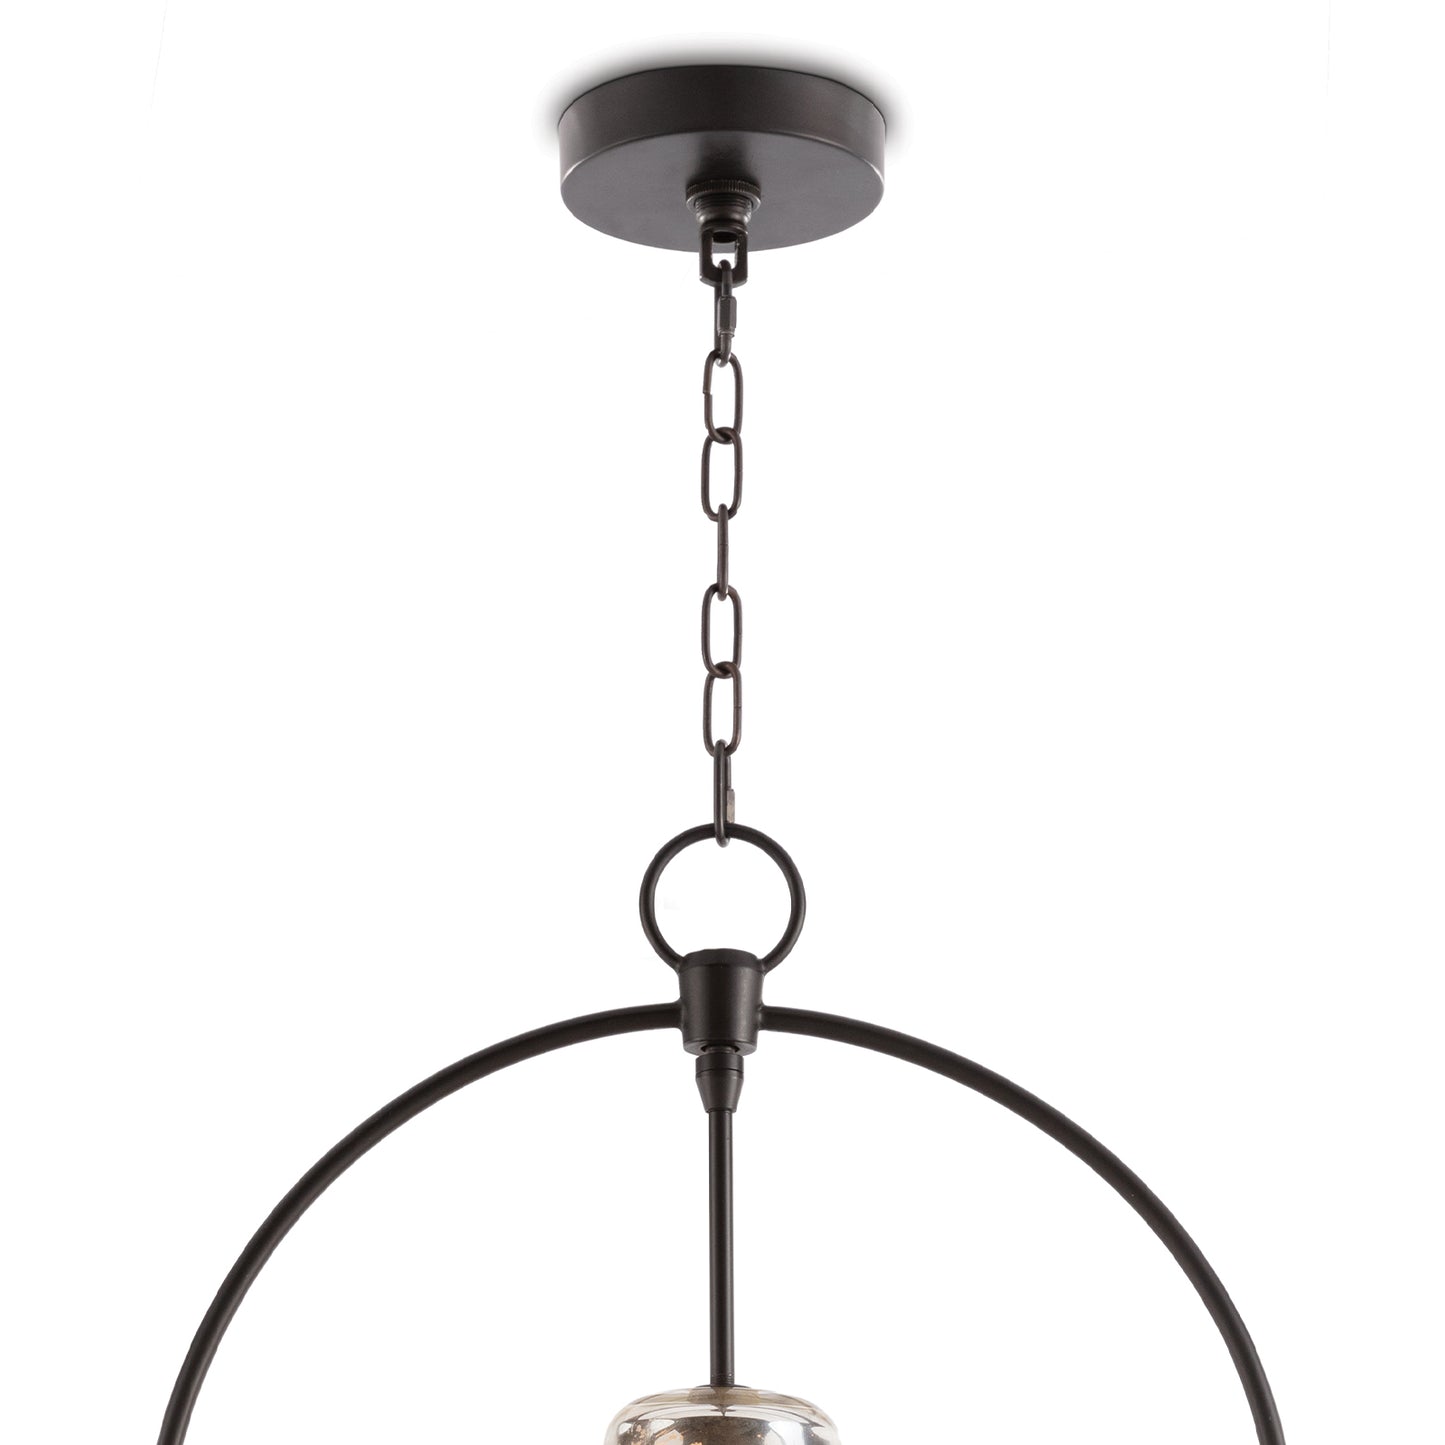 Emerson Bell Jar Pendant Large in Oil Rubbed Bronze by Southern Living